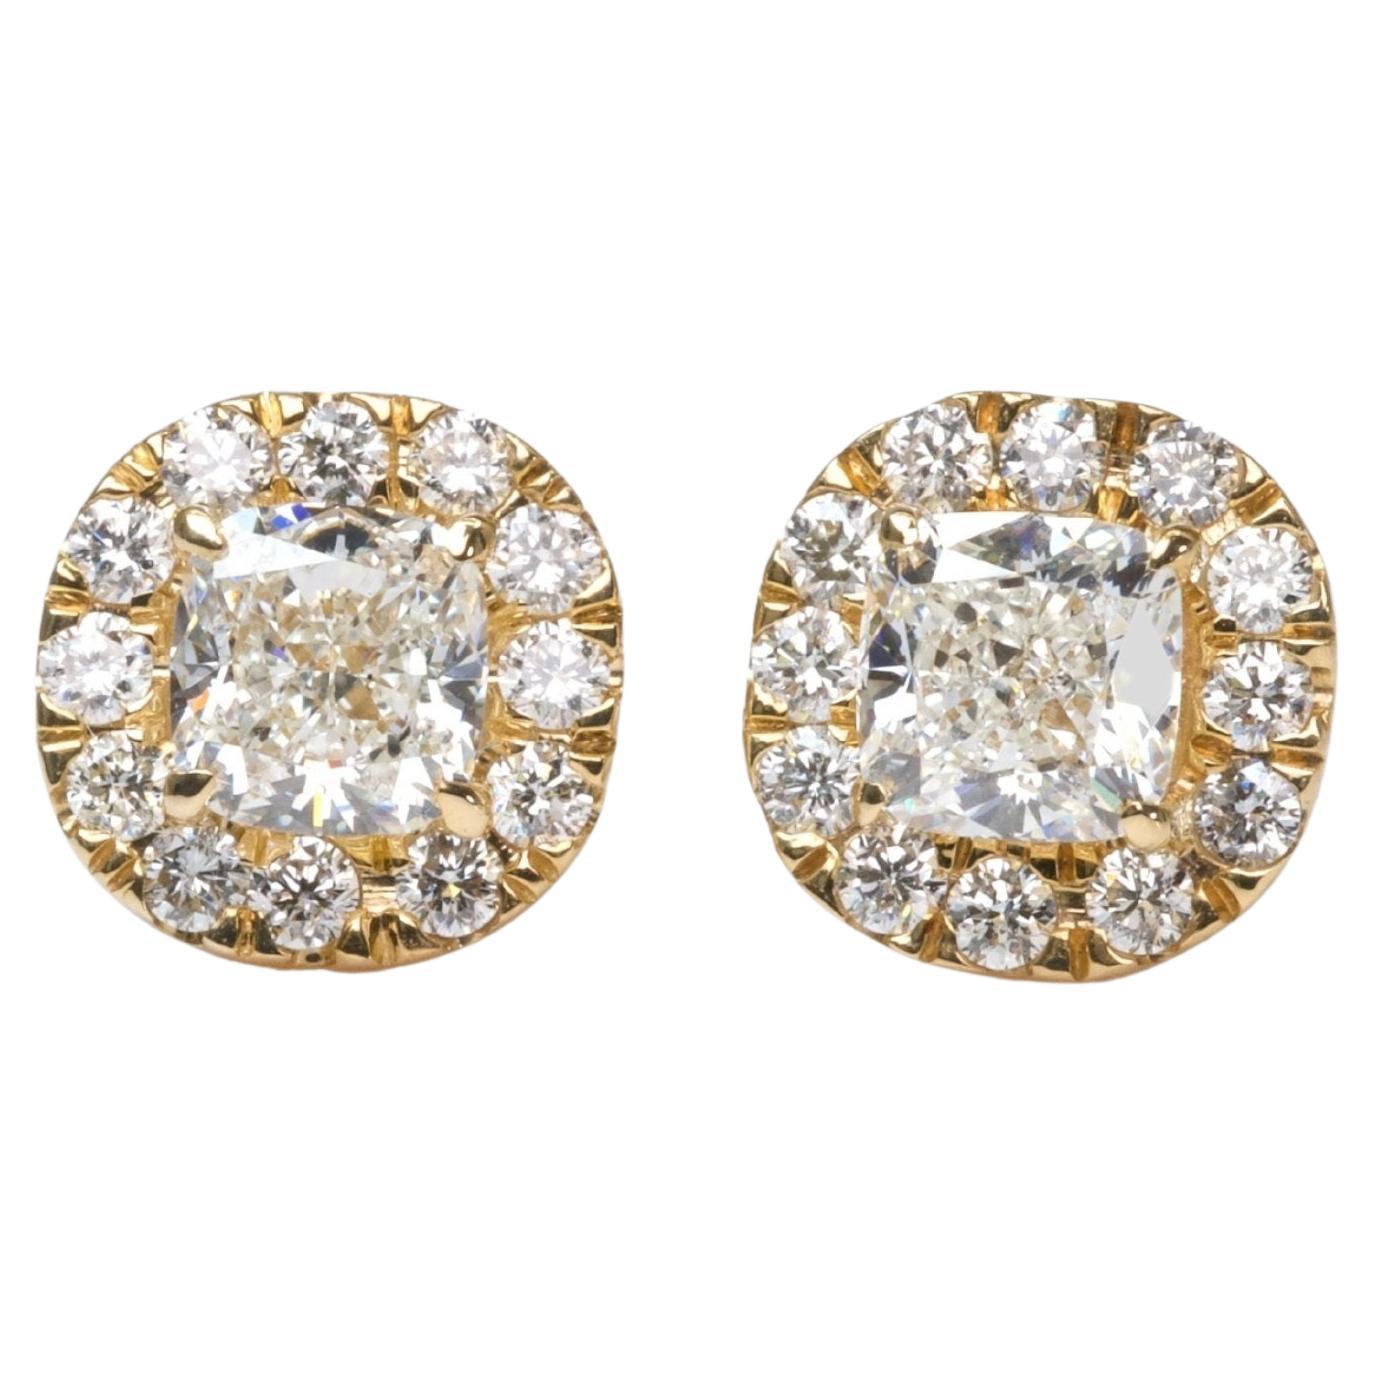 Sparkling 18k Yellow Gold Stud Halo Earrings with 1.40 Diamonds, GIA certificate For Sale